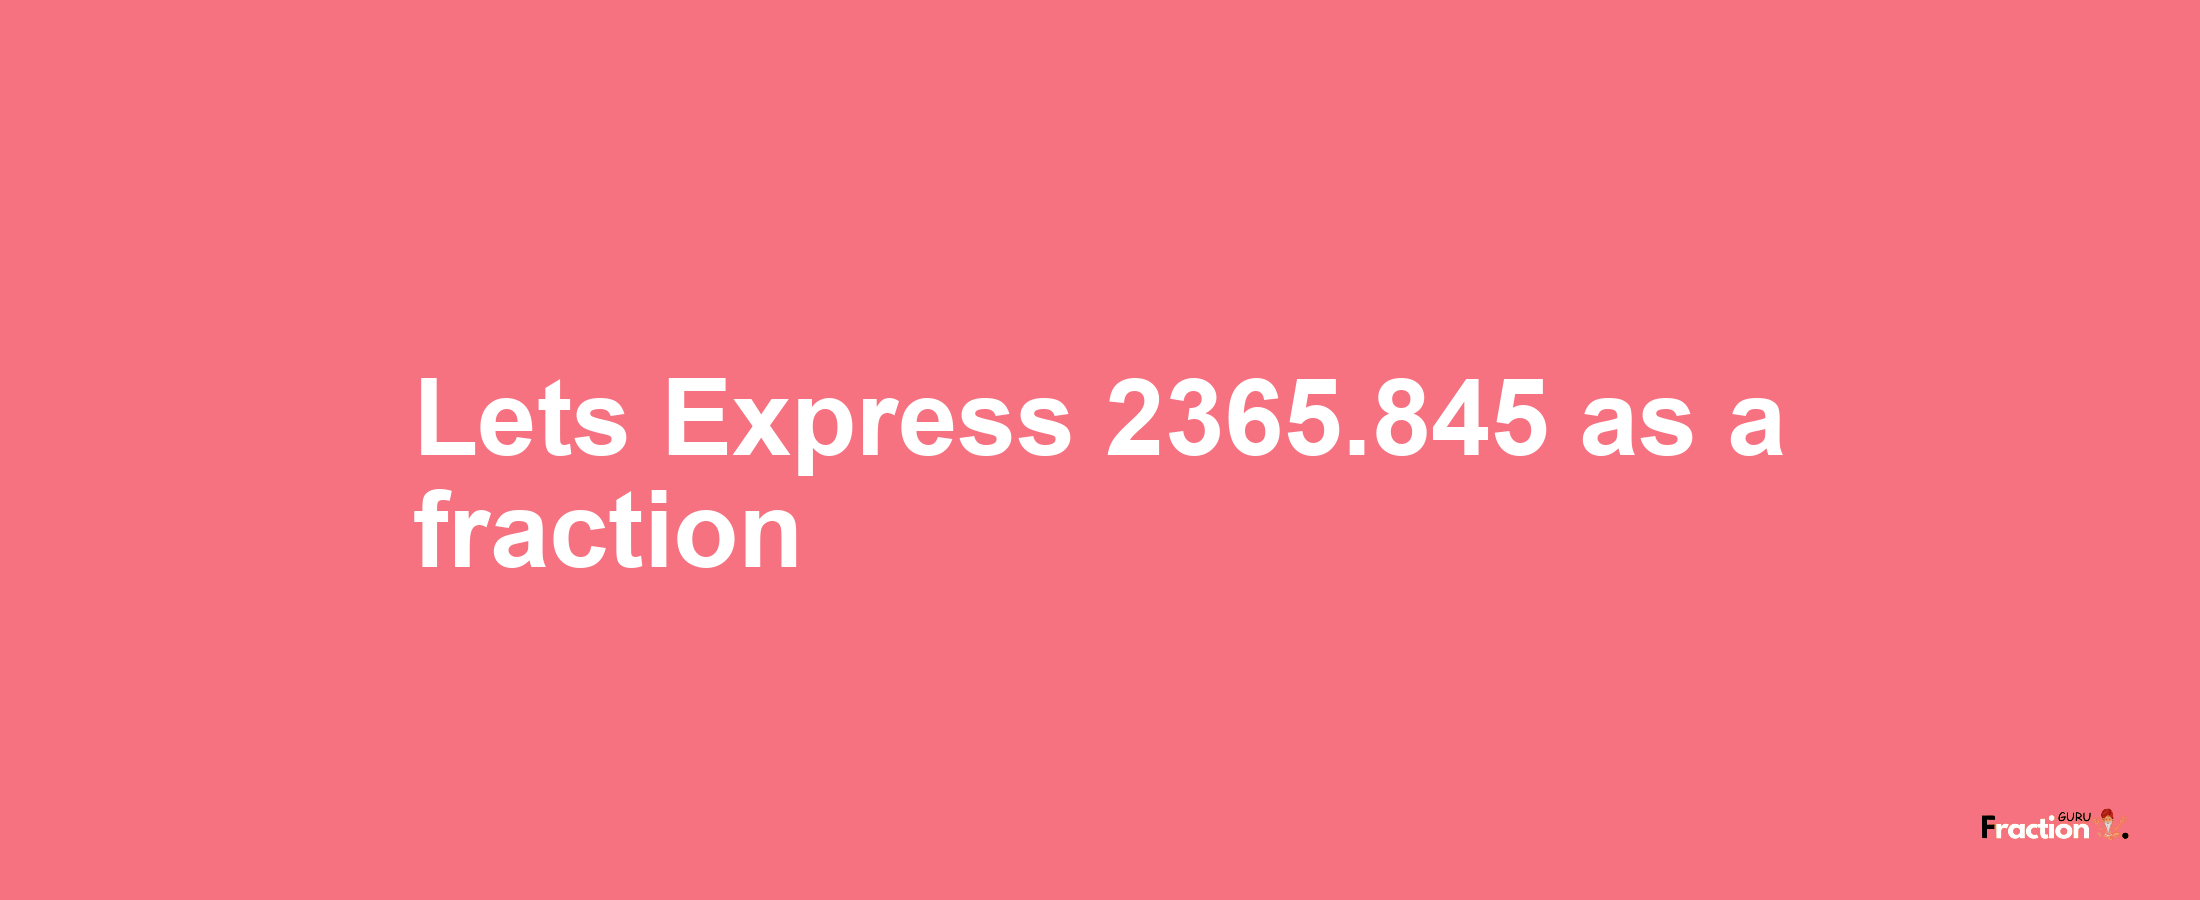 Lets Express 2365.845 as afraction